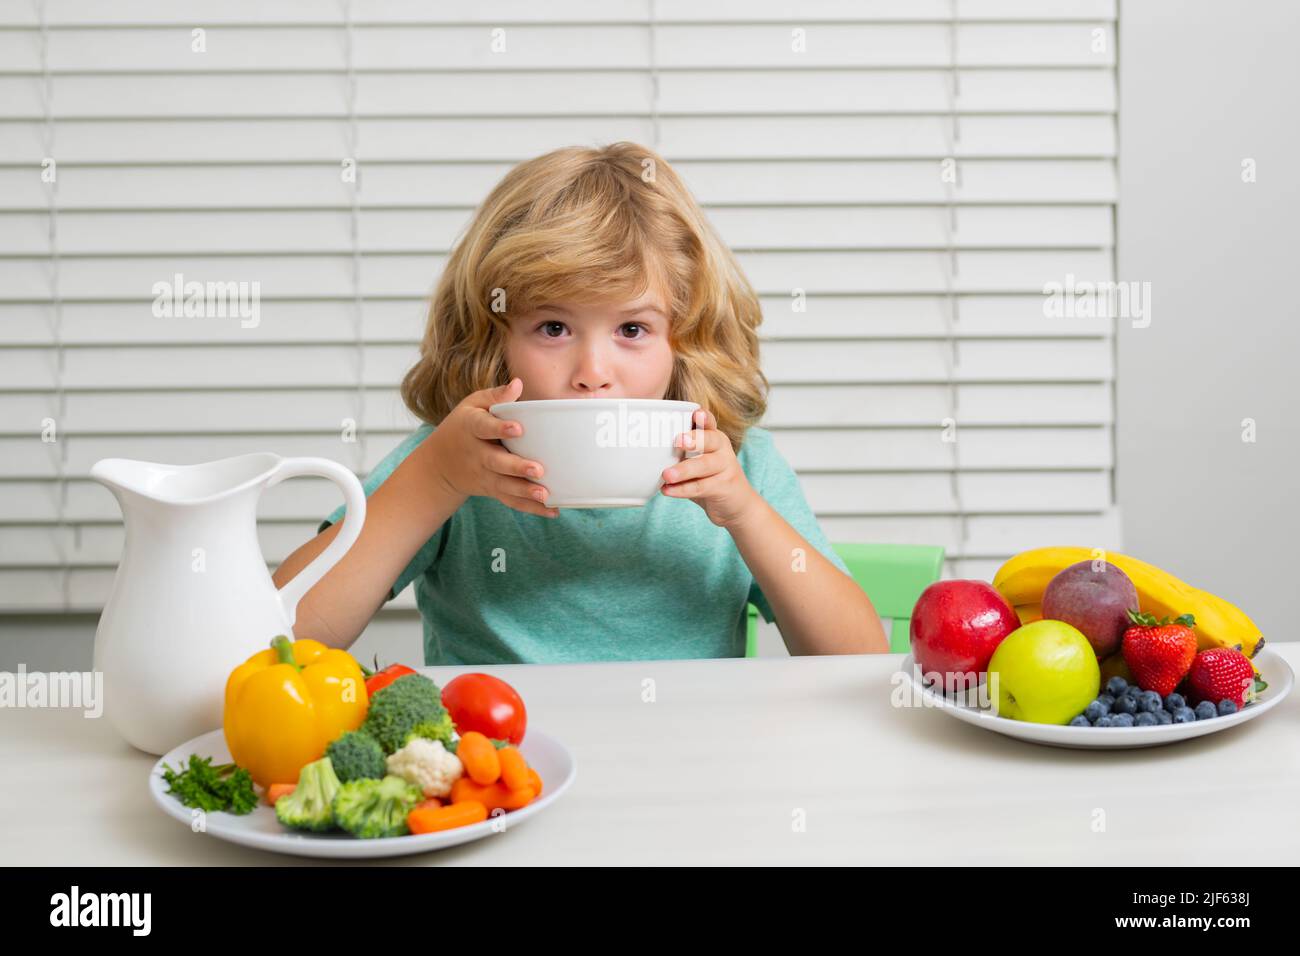 Hunger, appetite concept. Kid boy eating healthy food vegetables. Breakfast with milk, fruits and vegetables. Child eating during lunch or dinner. Stock Photo